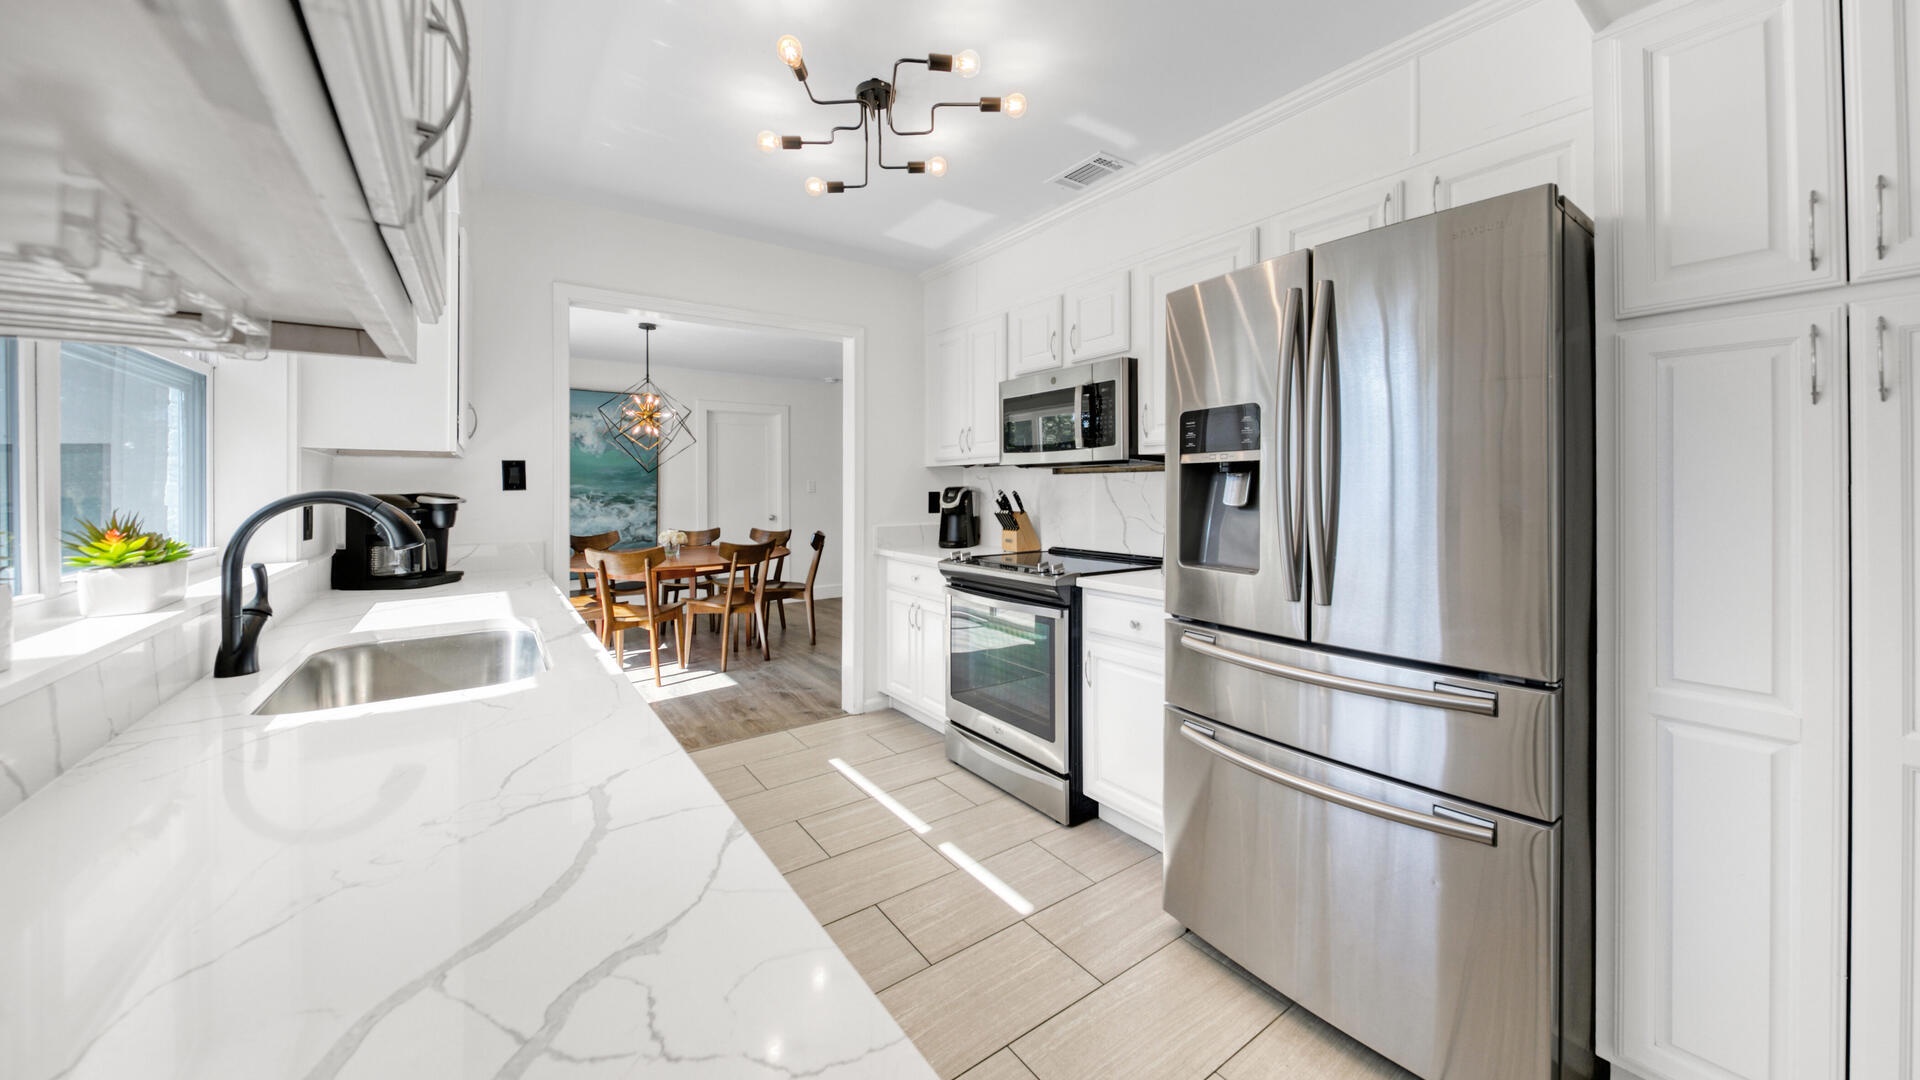 The fully stocked kitchen features quartz countertops and stainless appliances!